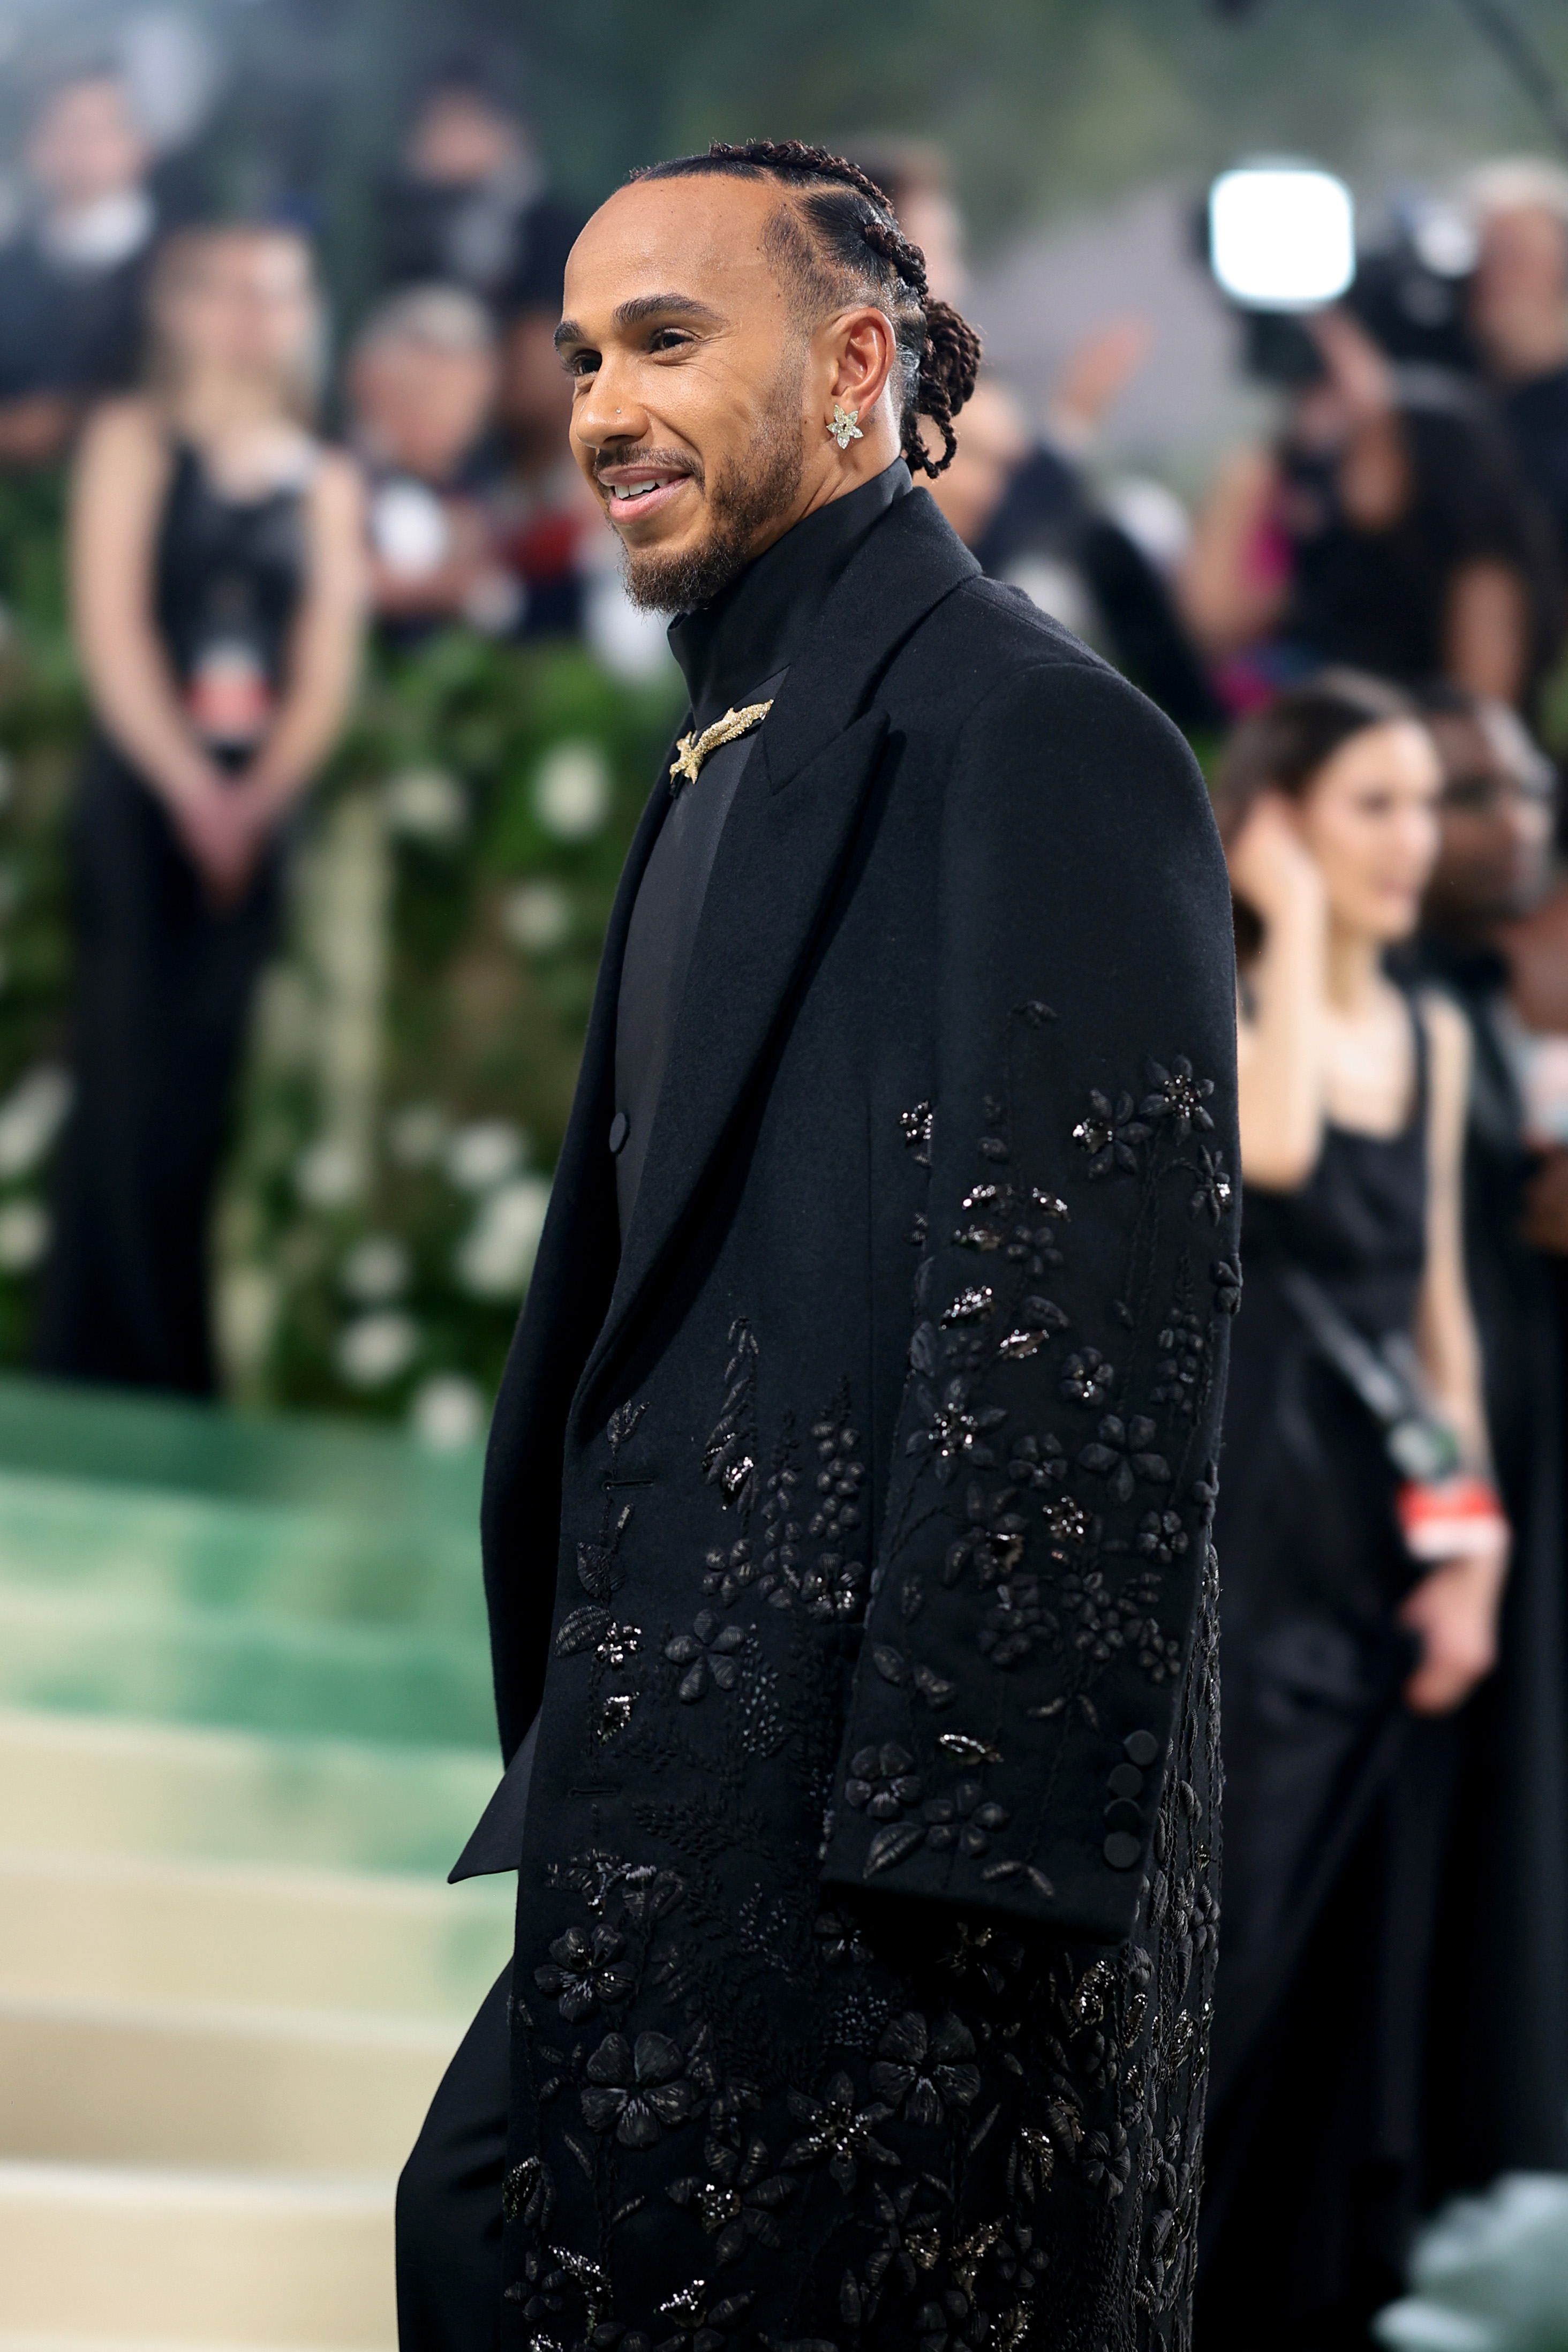 Lewis Hamilton wearing a black beaded Burberry suit at the Met Gala.